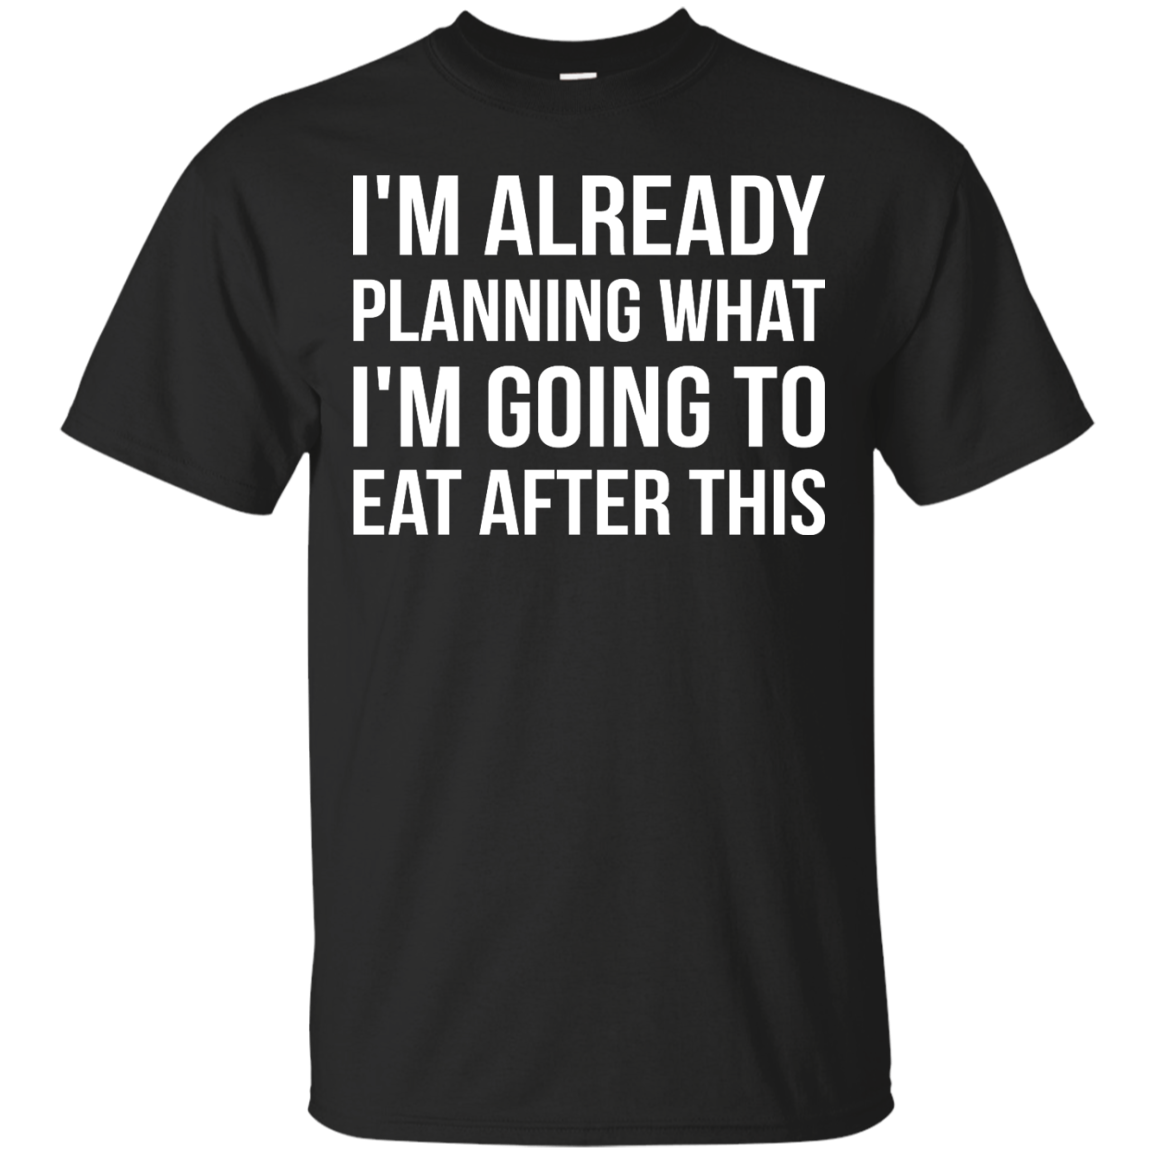 I'm already planning what I’m going to eat after this t-shirt